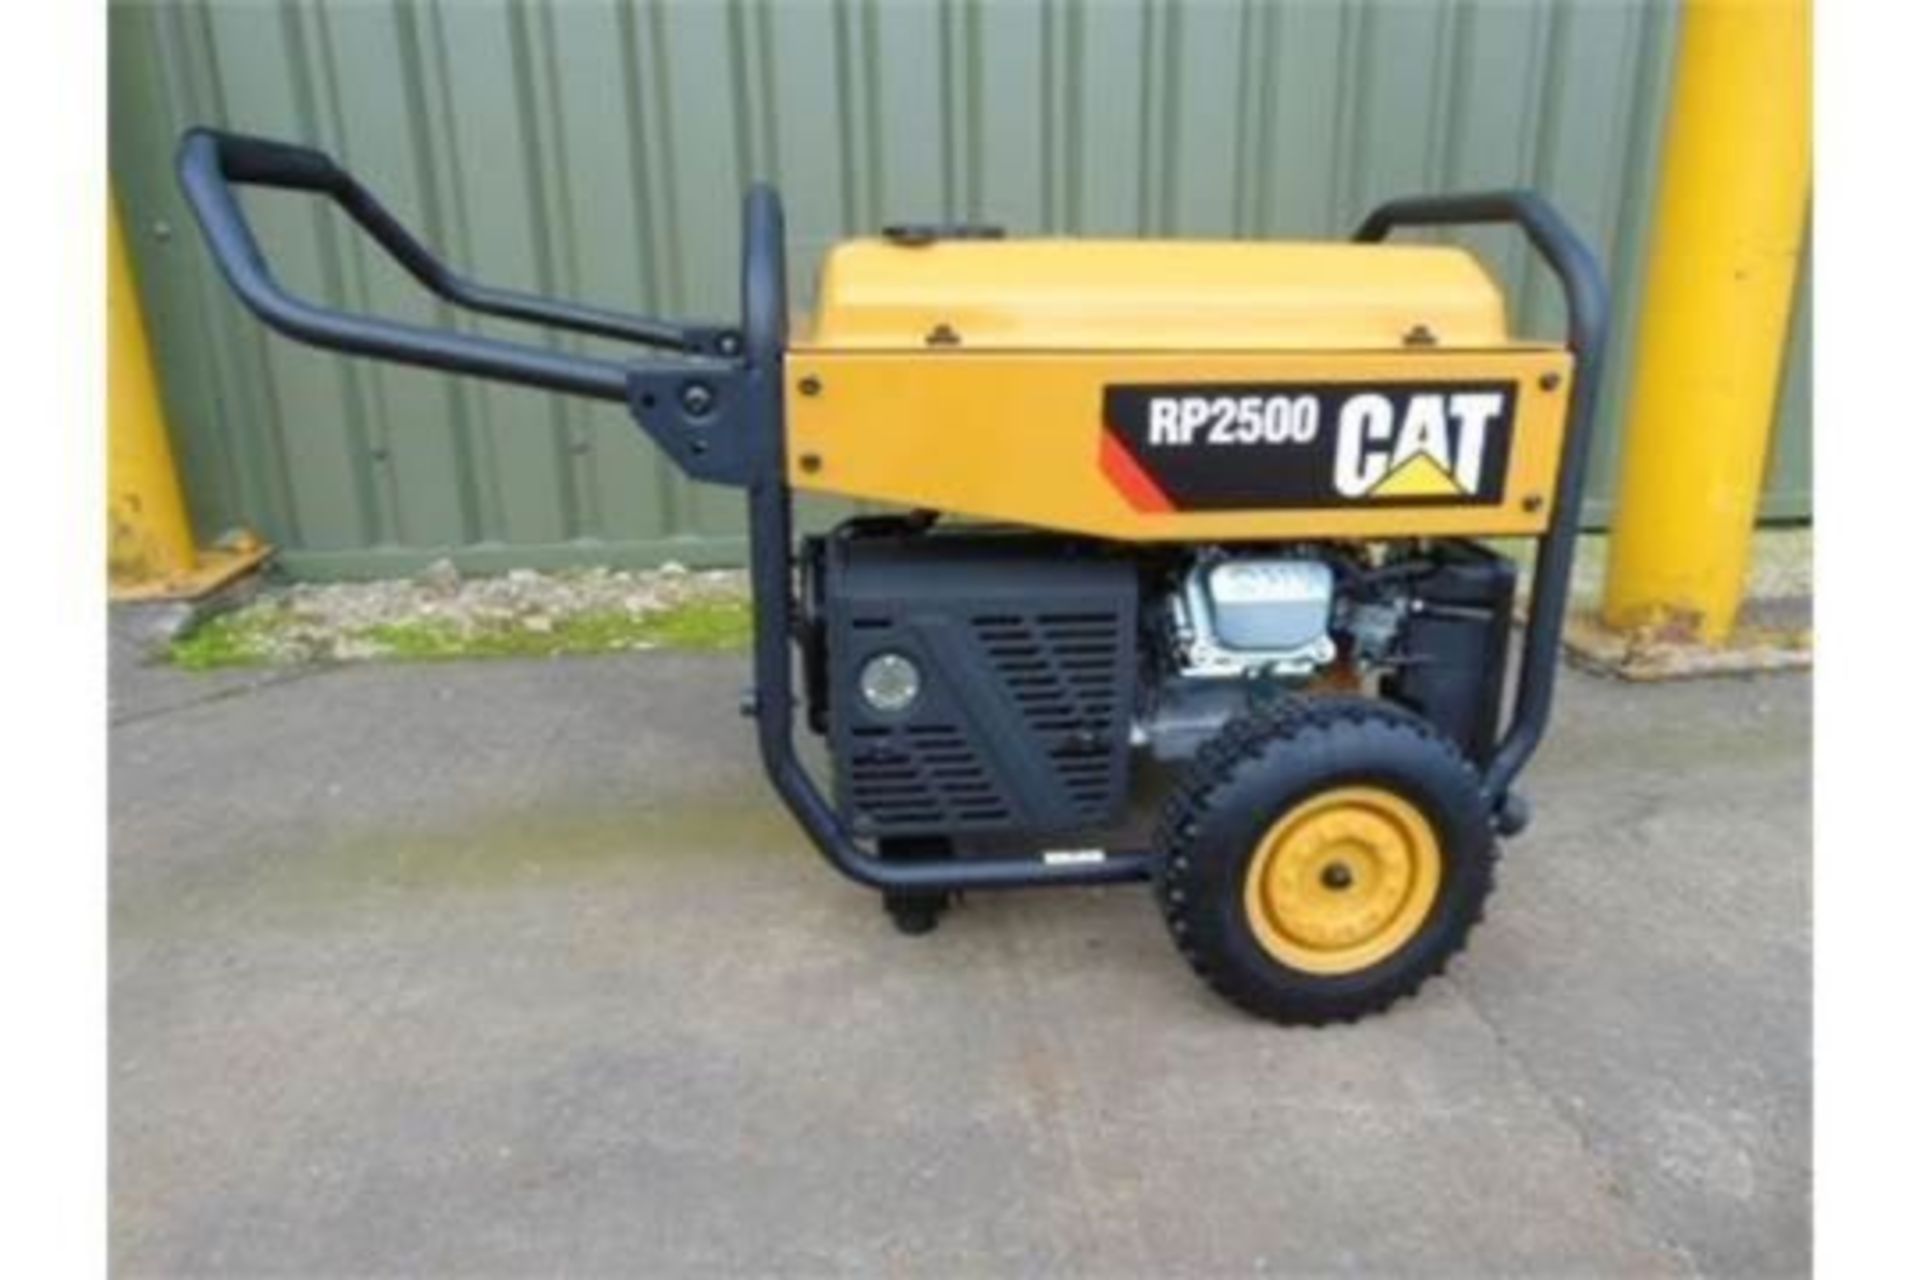 NEW and UNISSUED Caterpillar RP2500 (3.1 KVA) Industrial Petrol Generator Set - Image 5 of 5